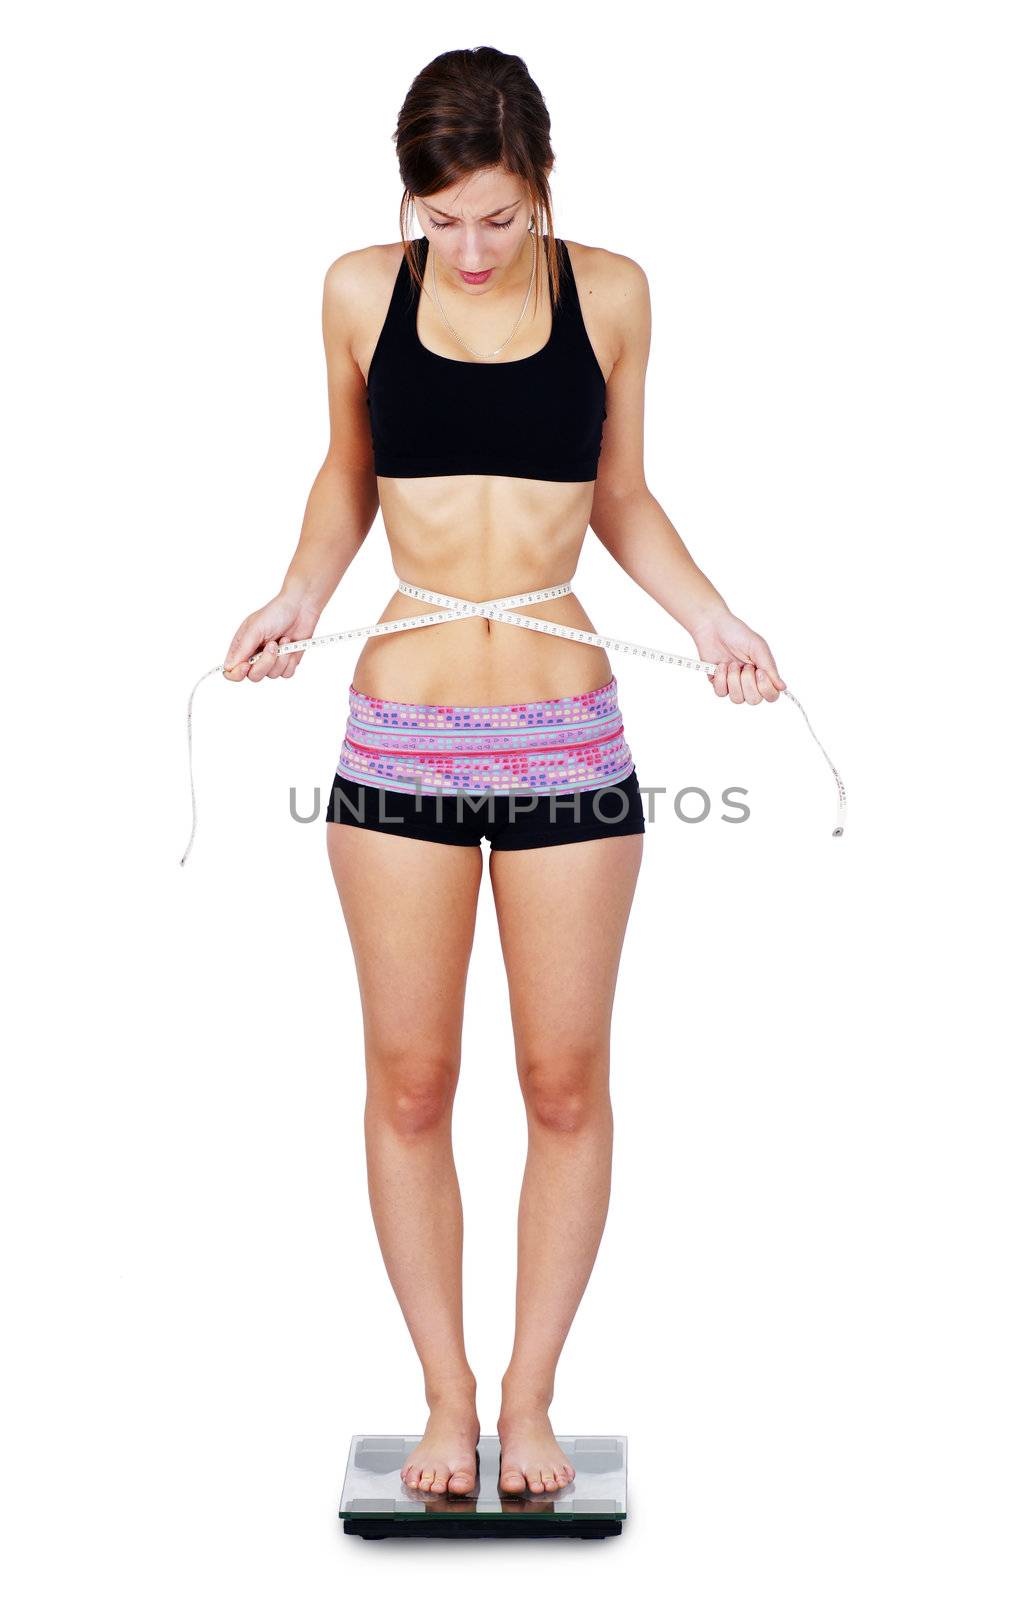 Very thin or anorexic young woman upset over her weight and waist measurements as she stands on scale.